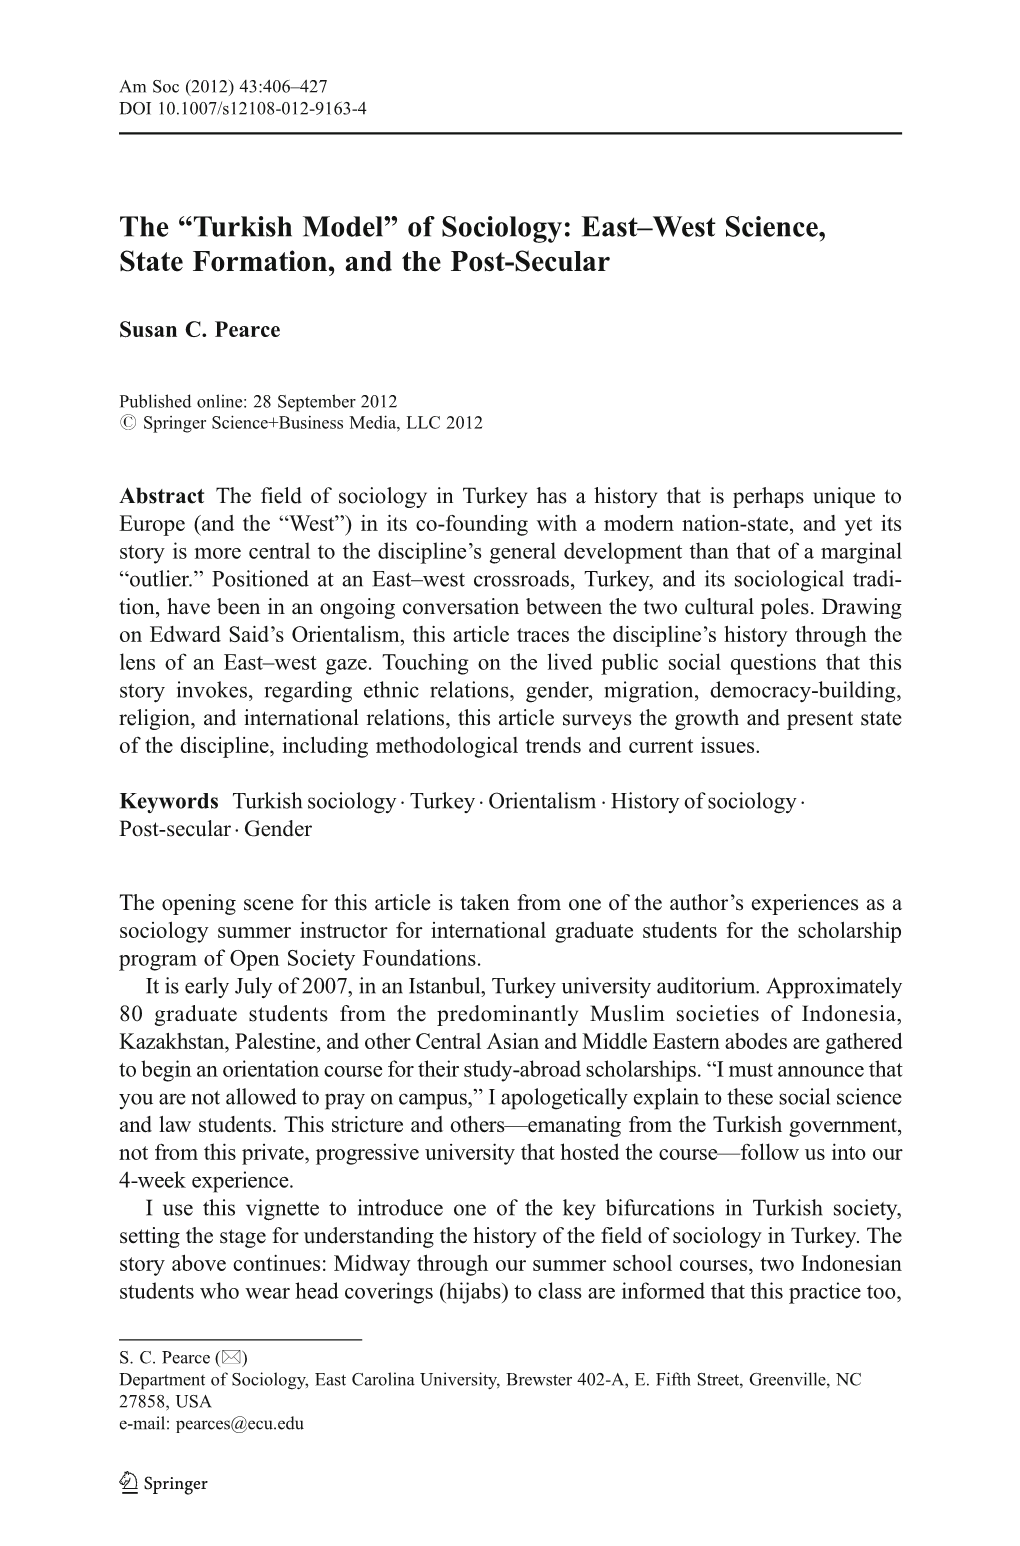 The “Turkish Model” of Sociology: East–West Science, State Formation, and the Post-Secular